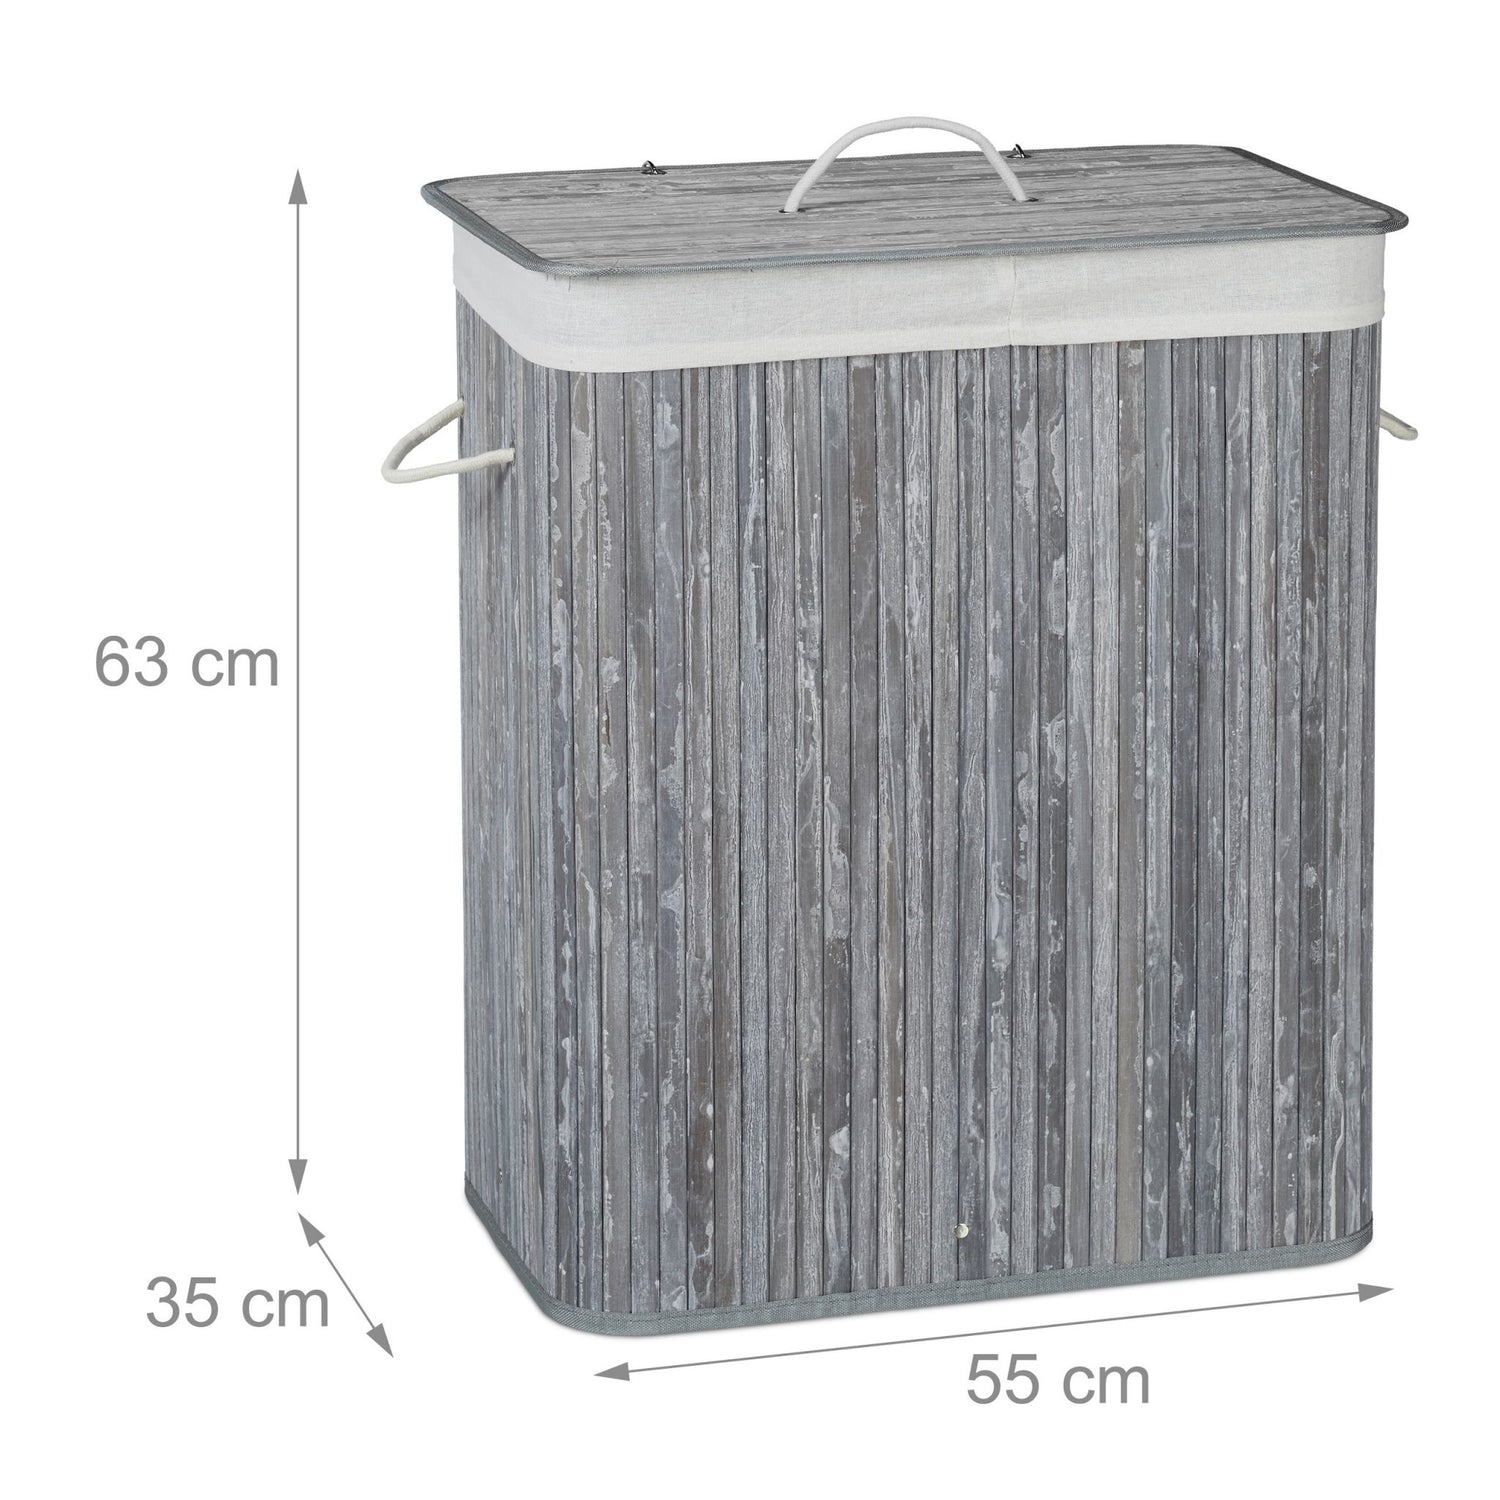 RelaxDays Bamboo Laundry Hamper, 2 Compartments Bamboo Bathrooms